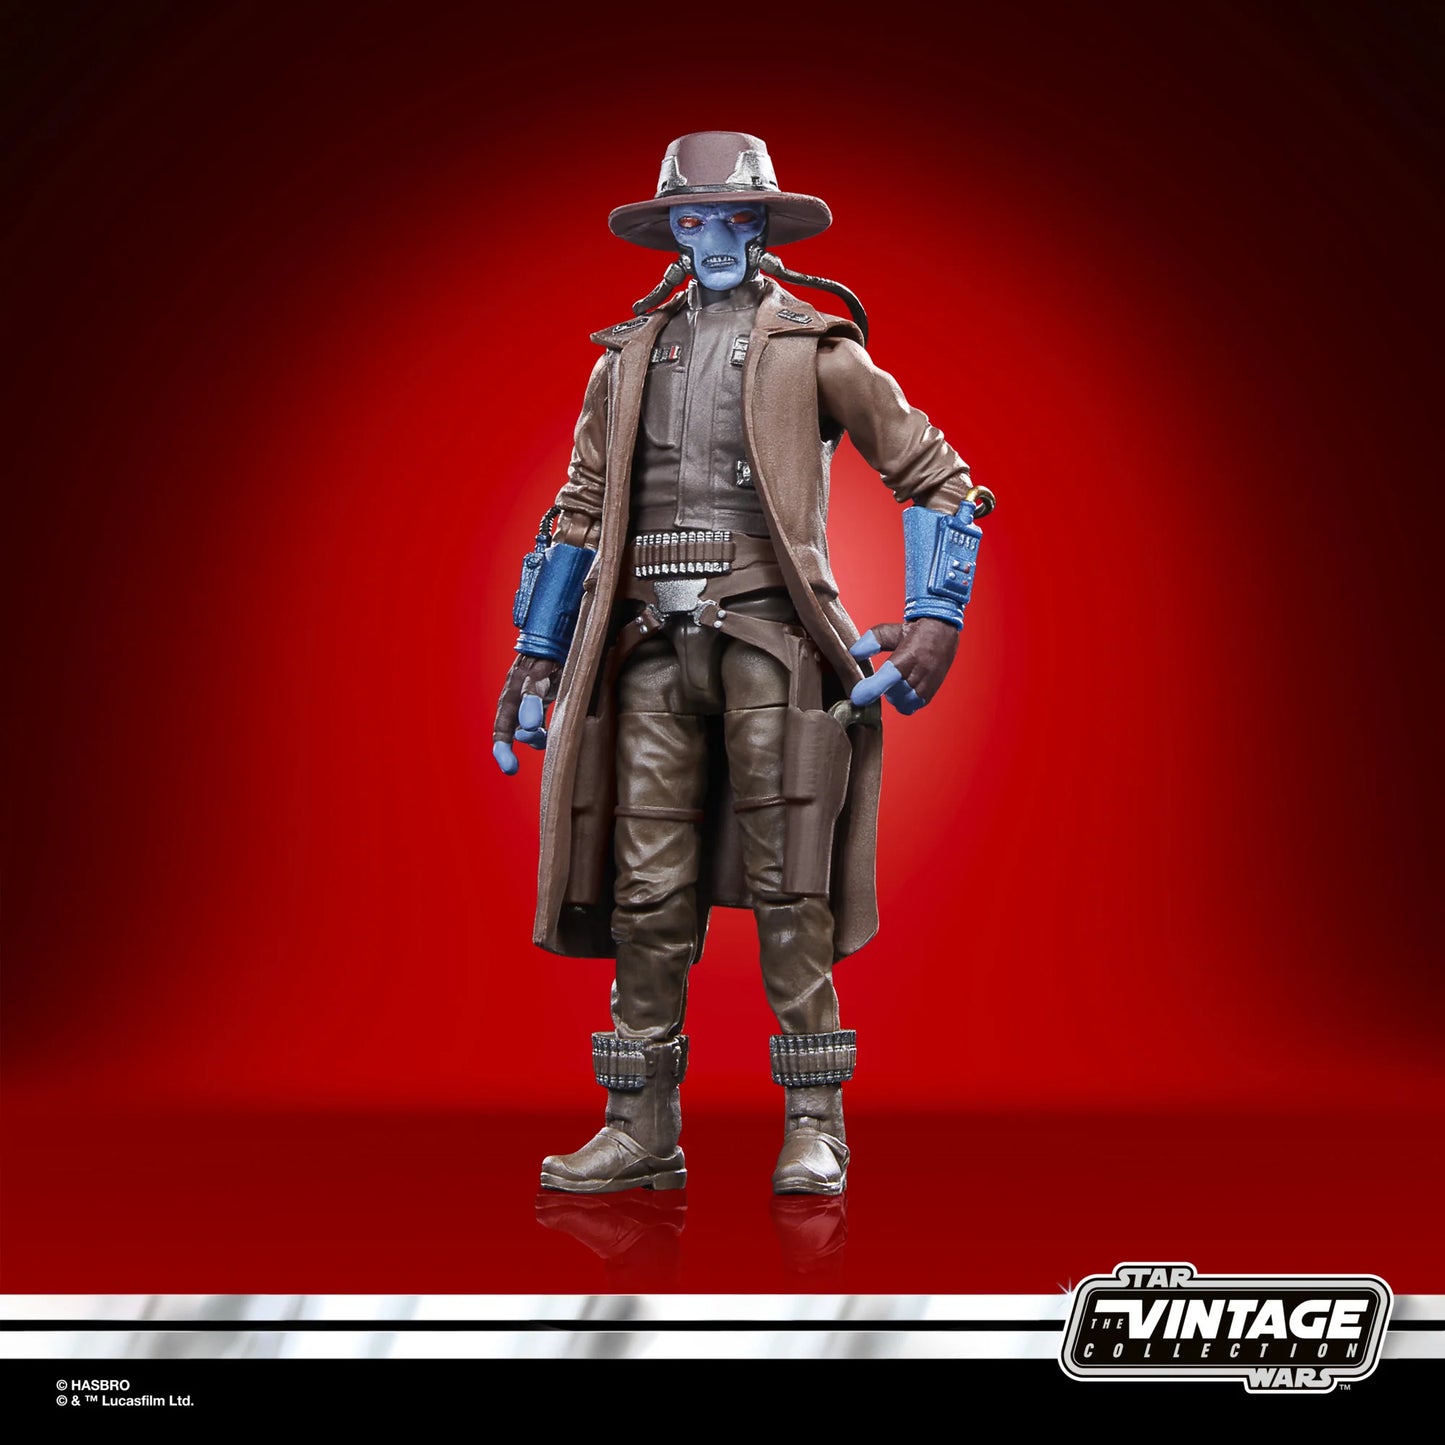 NON MINT Star Wars The Vintage Collection Cad Bane 3.75" Action Figure